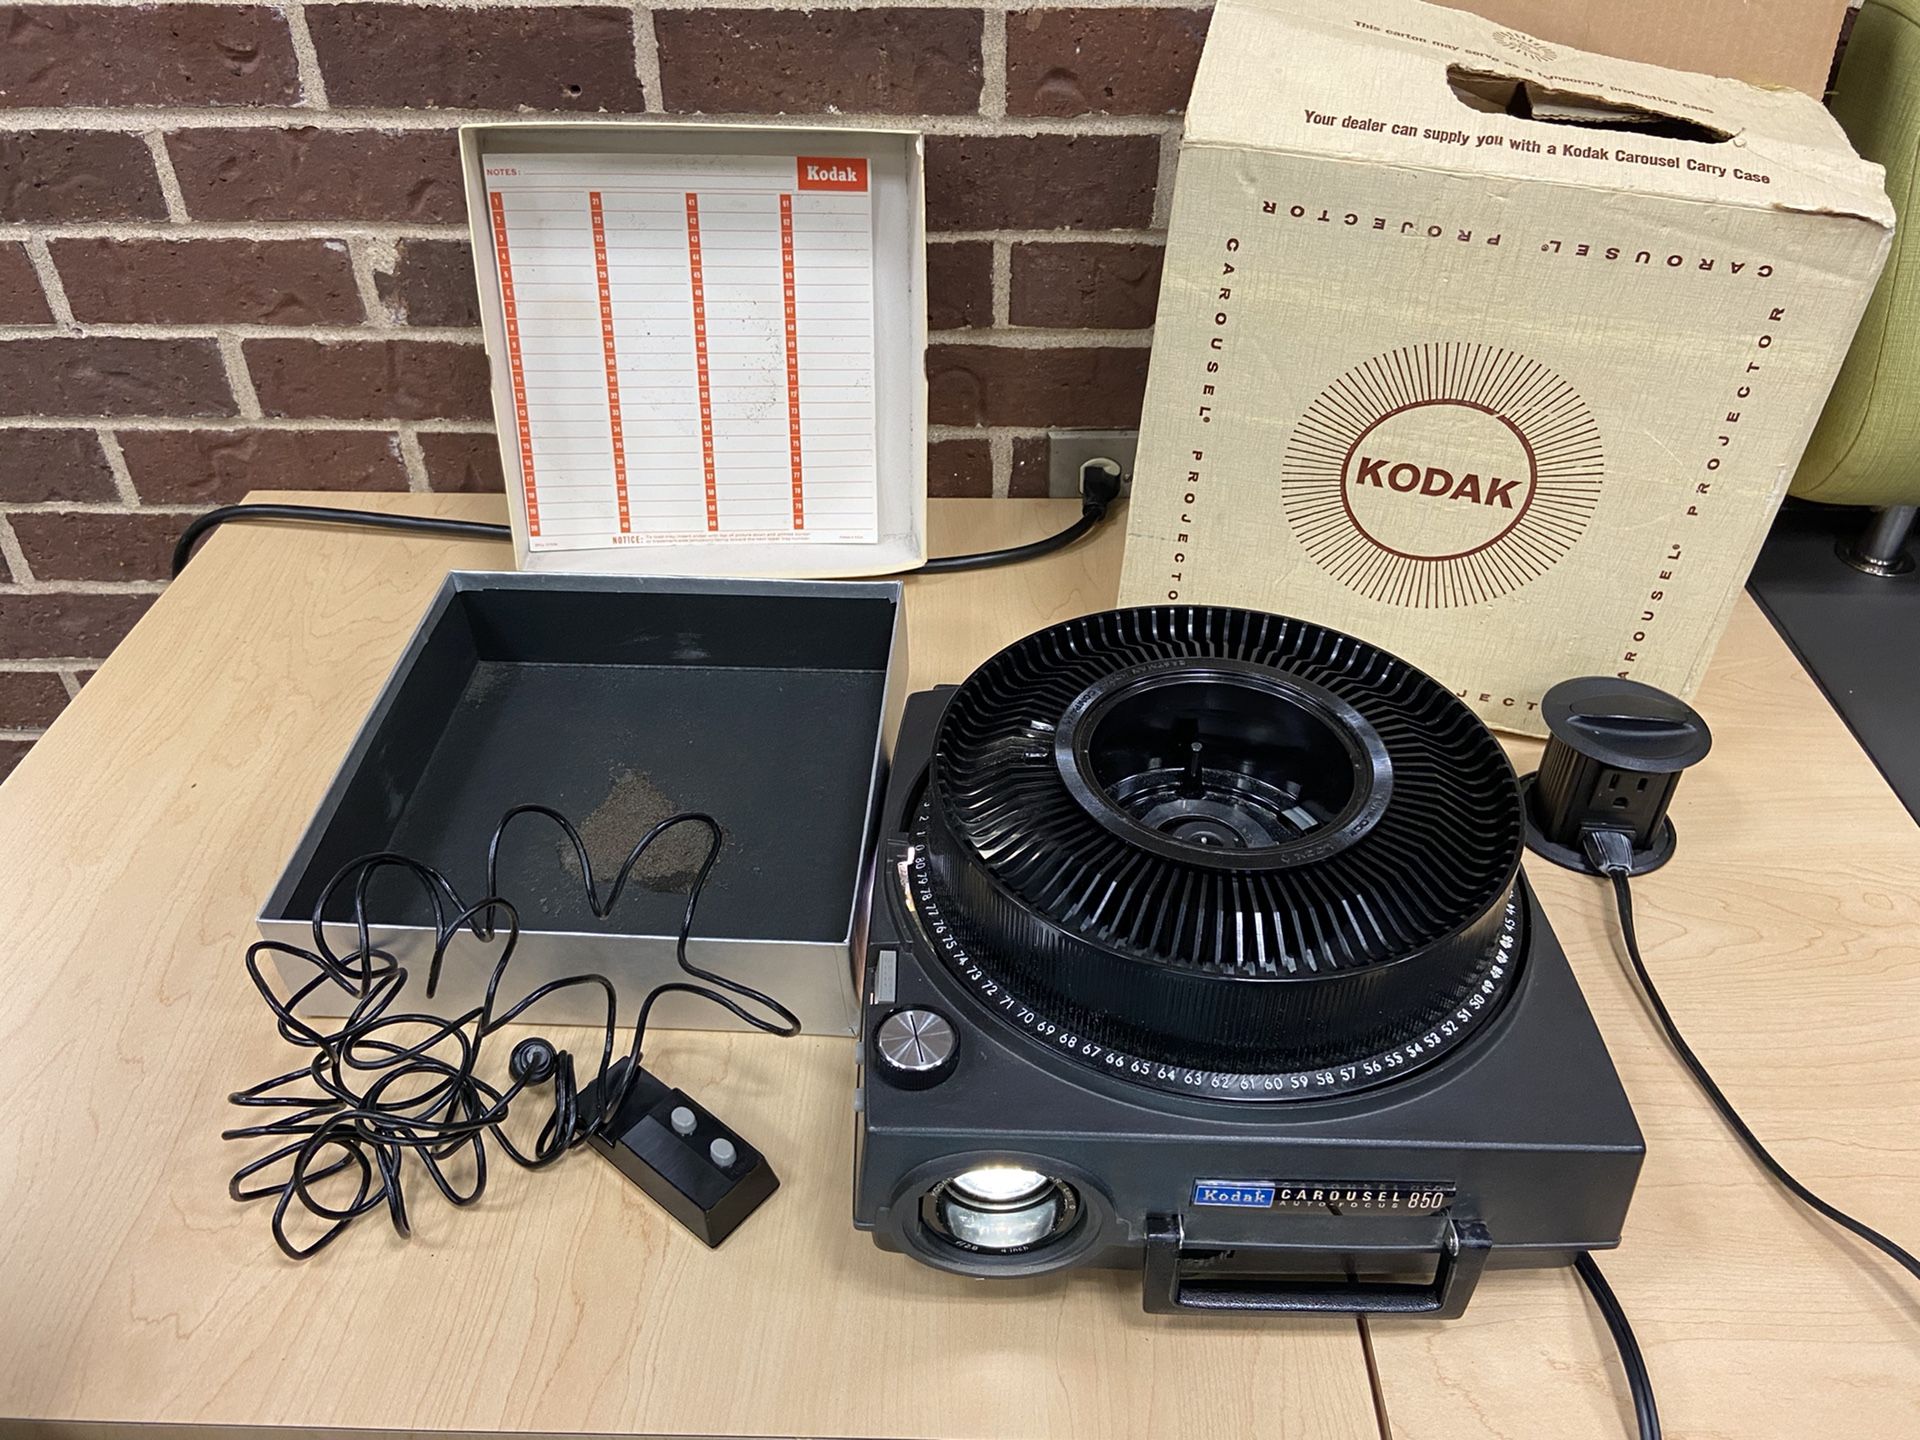 Kodak Carousel 850H Slide Projector with Remote & Original Box - FOR PARTS